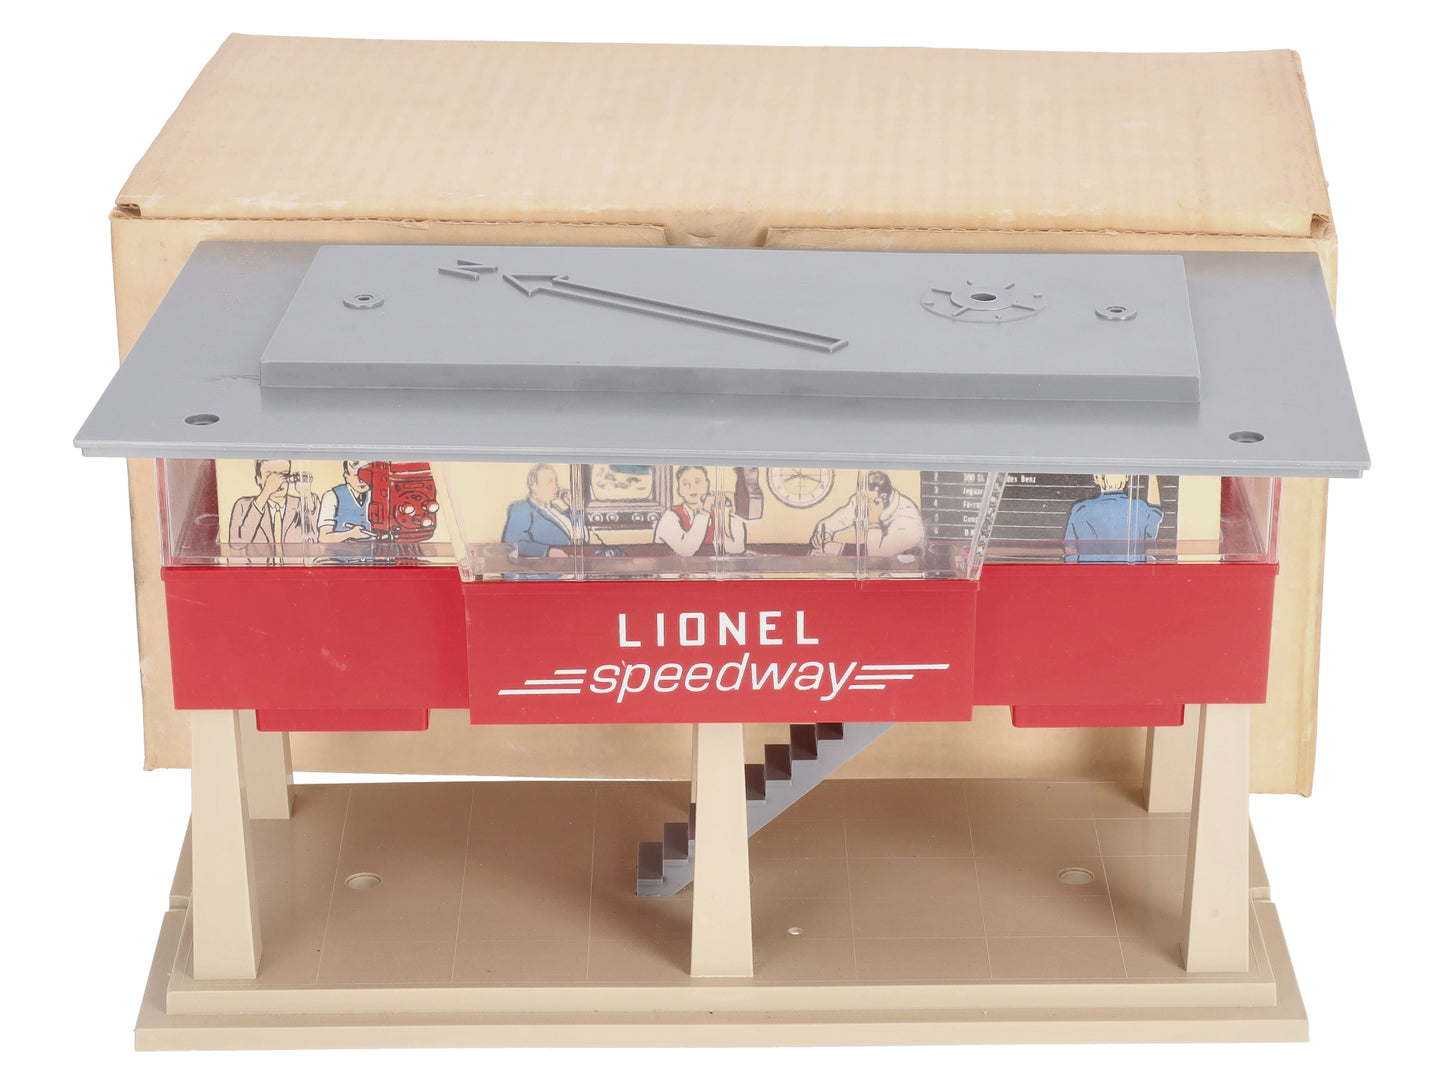 Lionel 5160 Vintage O Official Viewing Stand EX/Box